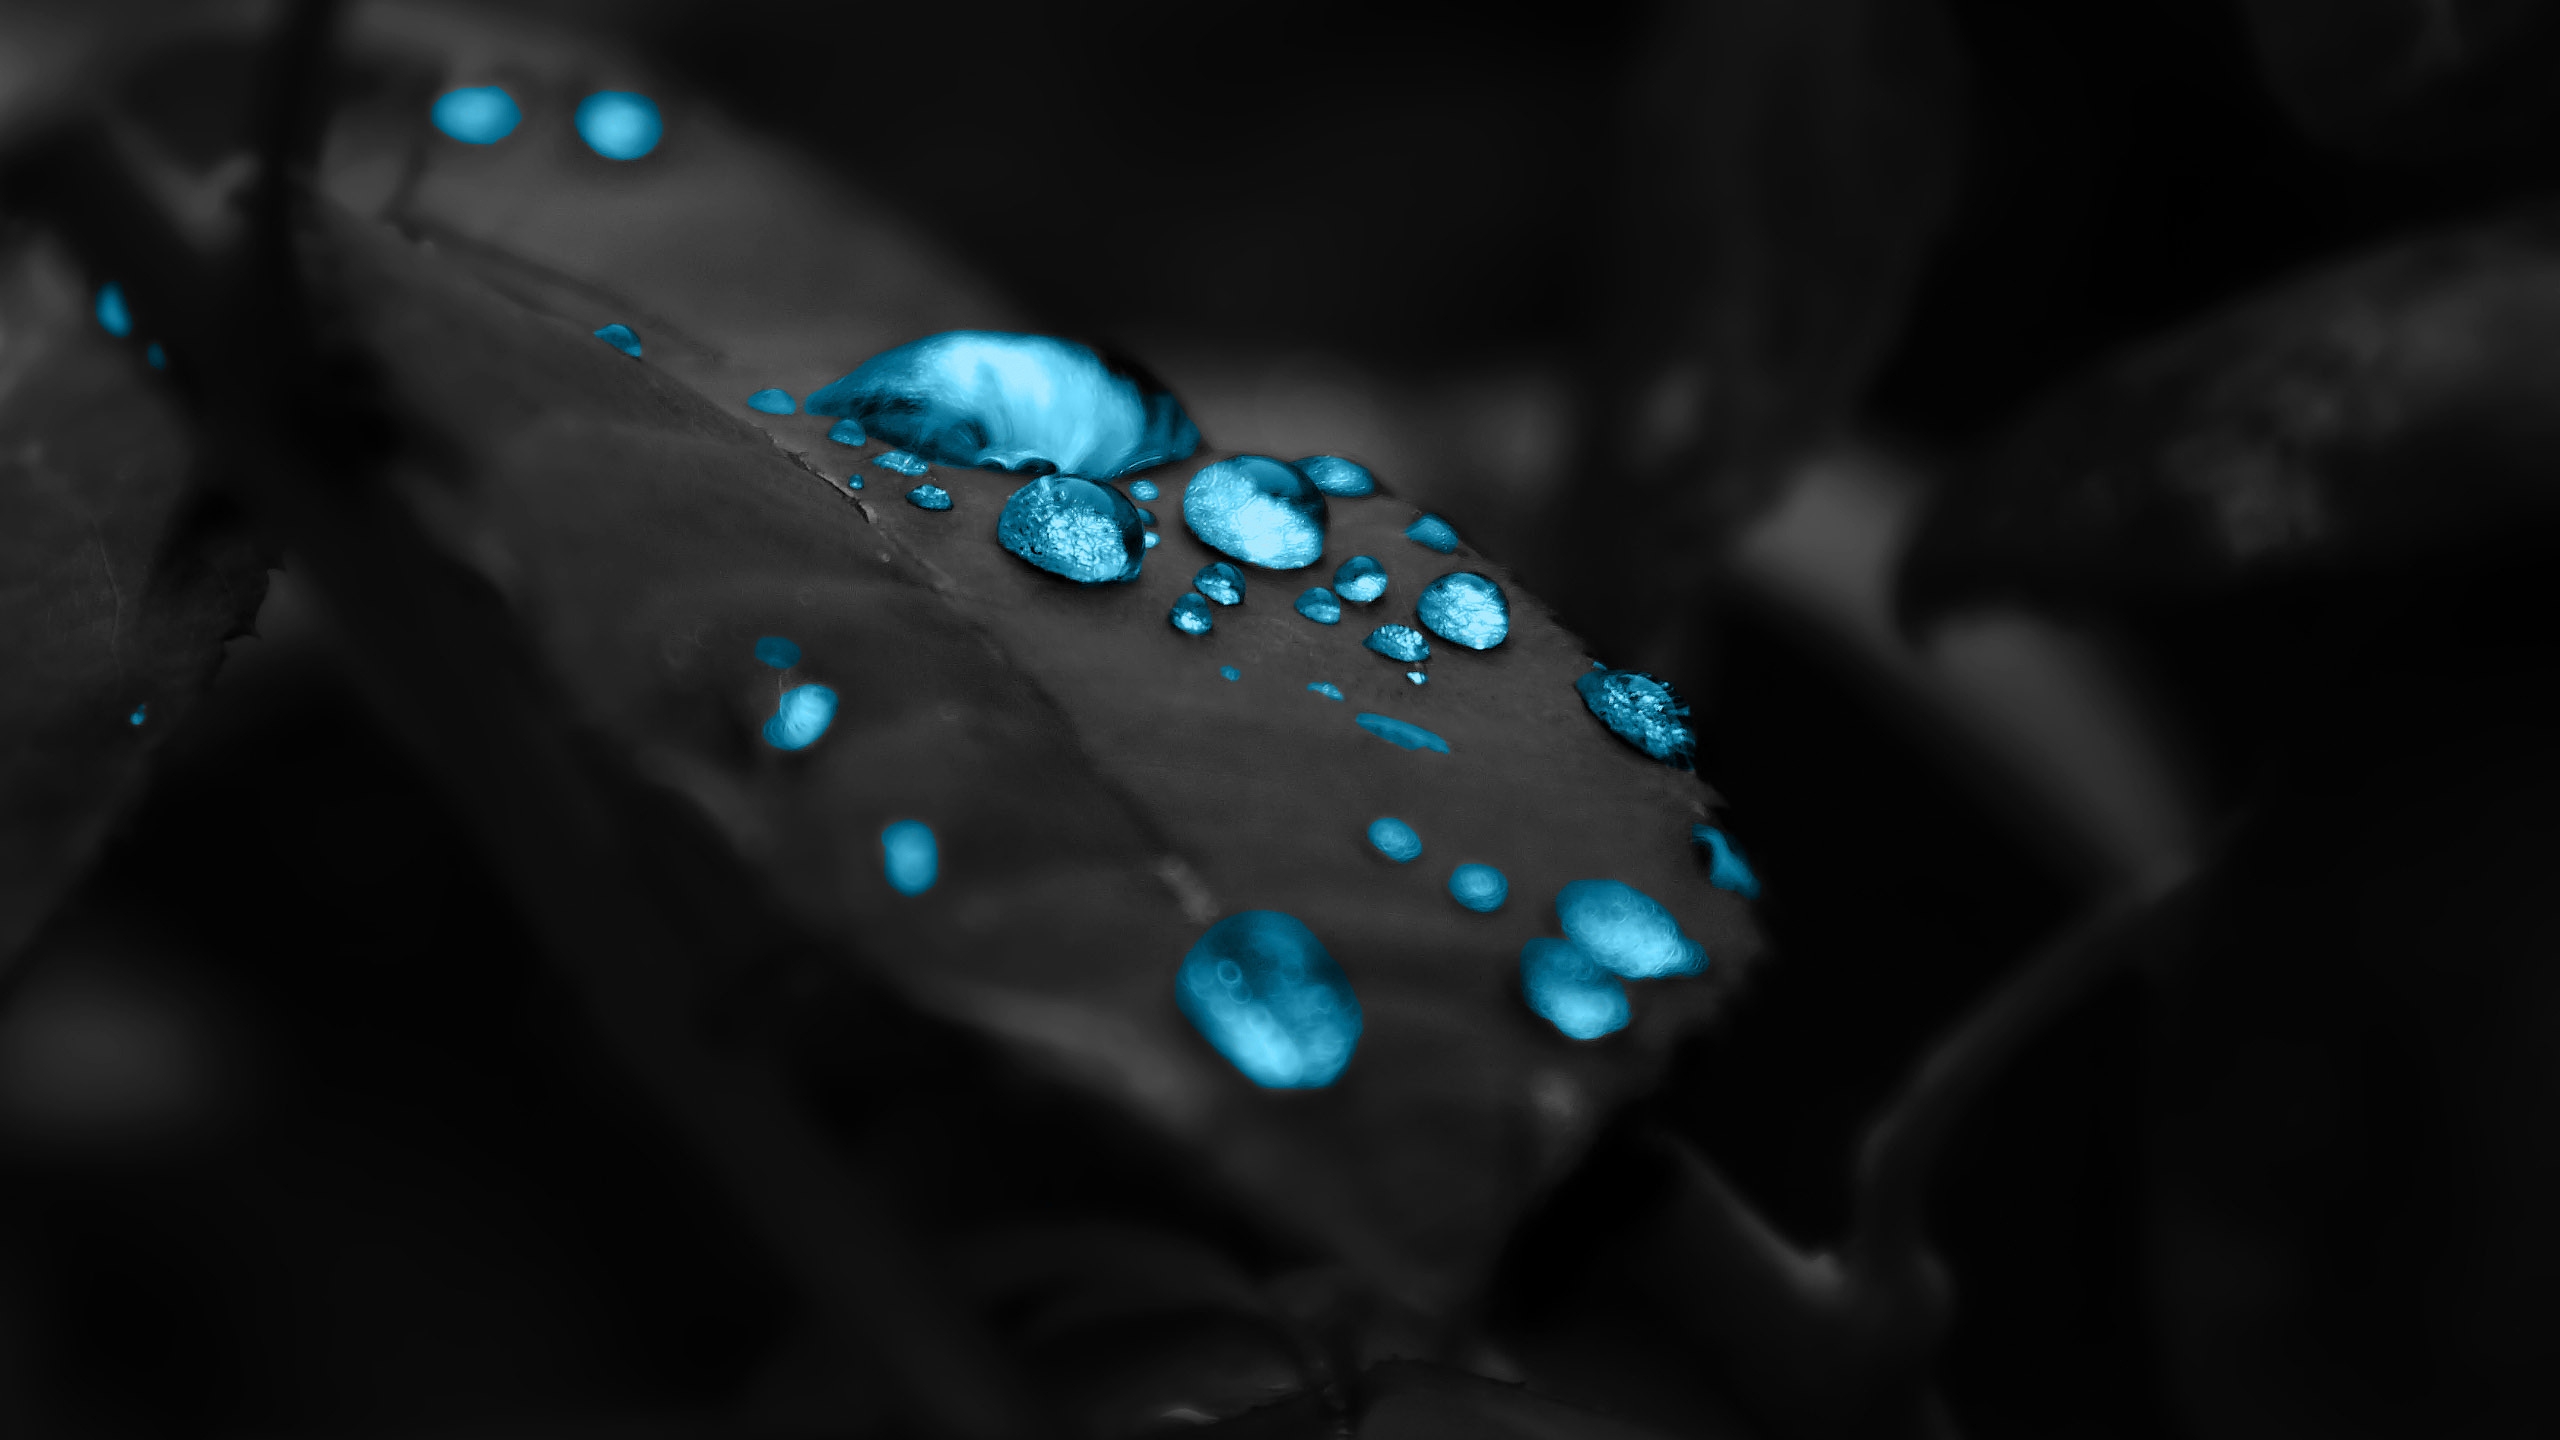 Turquoise Water Drops for 2560x1440 HDTV resolution